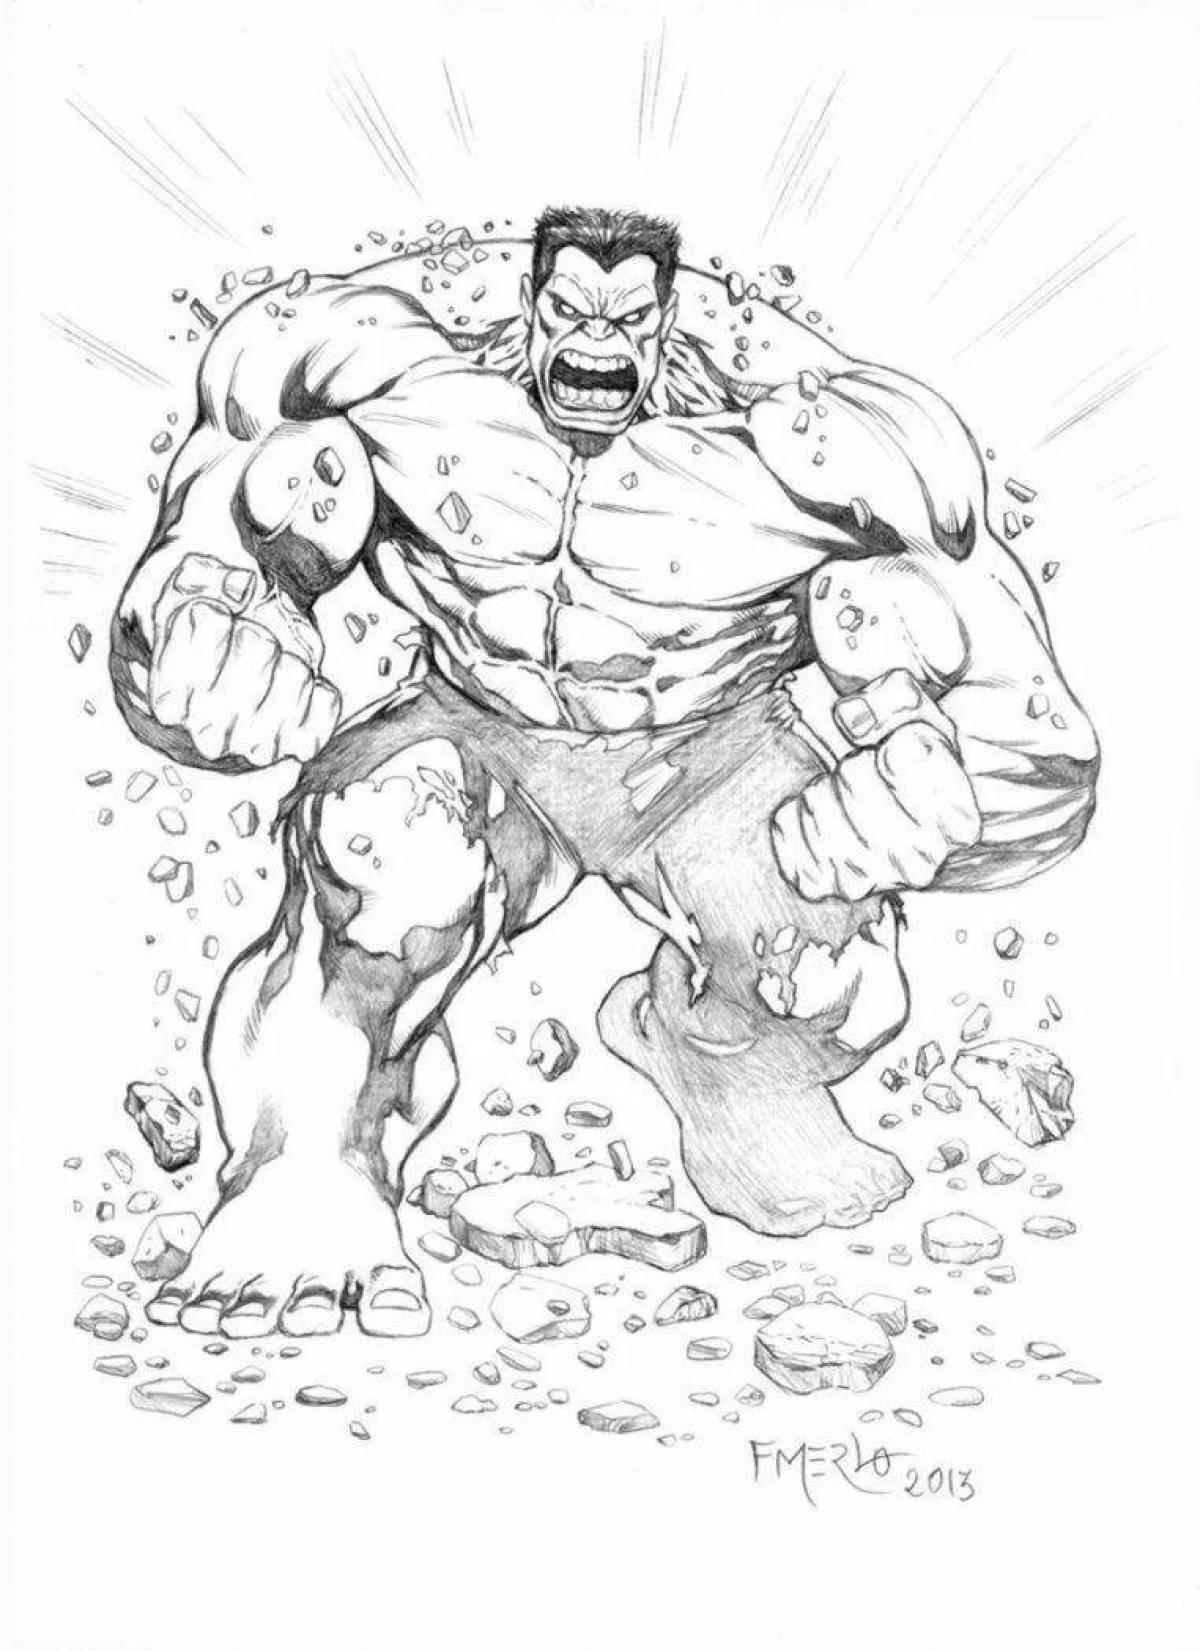 A strikingly colored red hulk coloring book